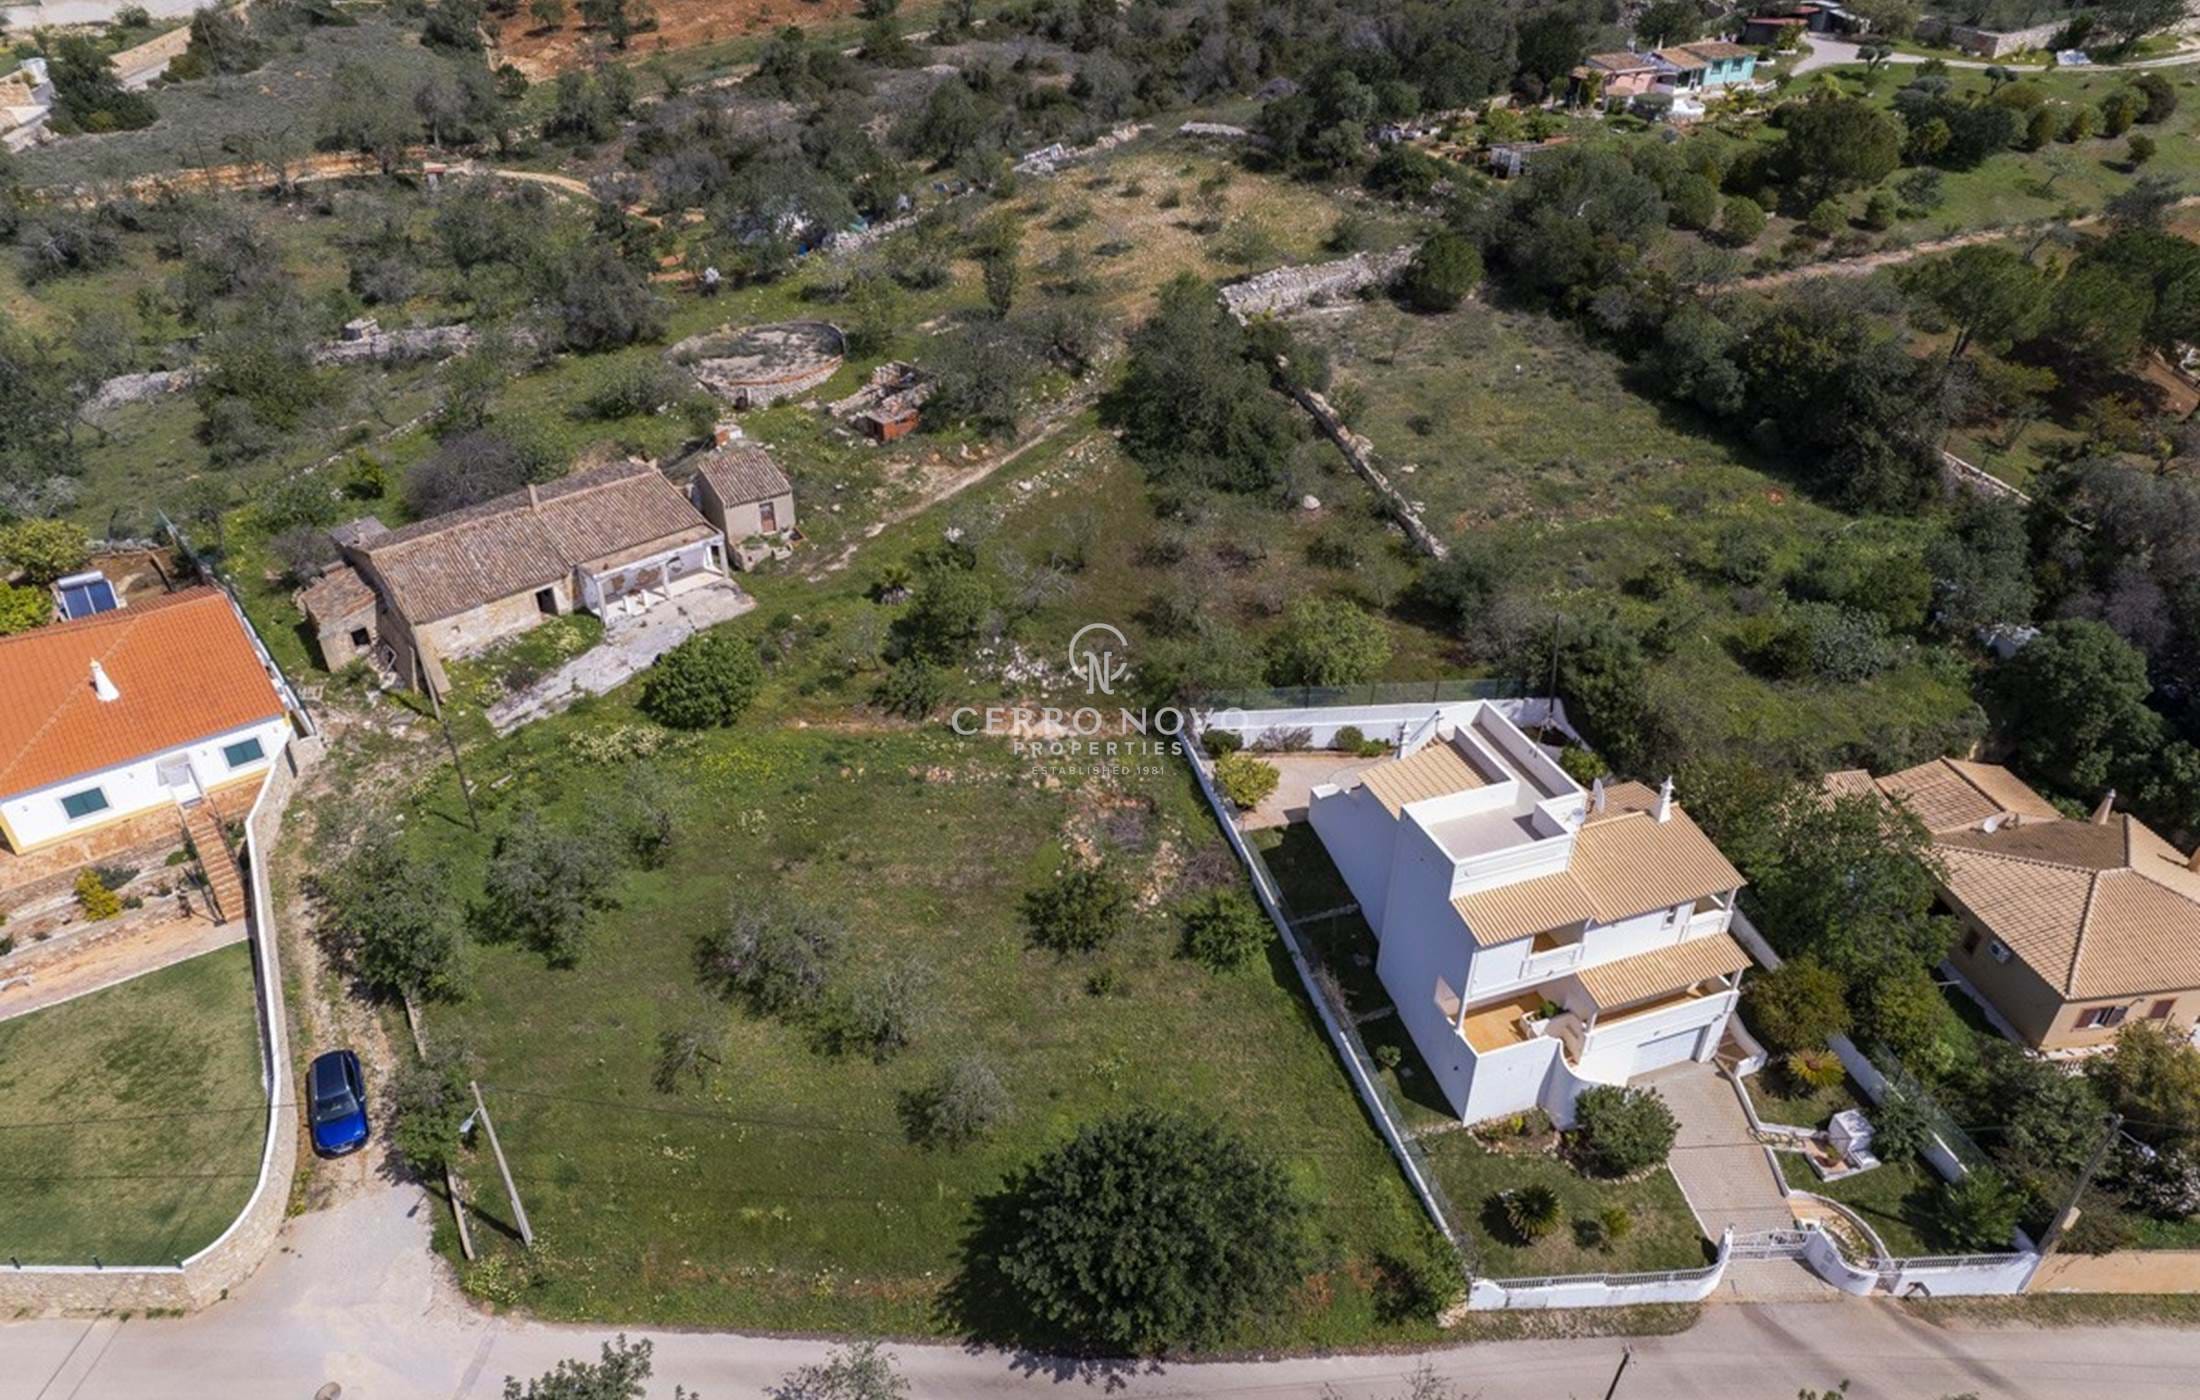 A large plot with permission to build a villa with pool